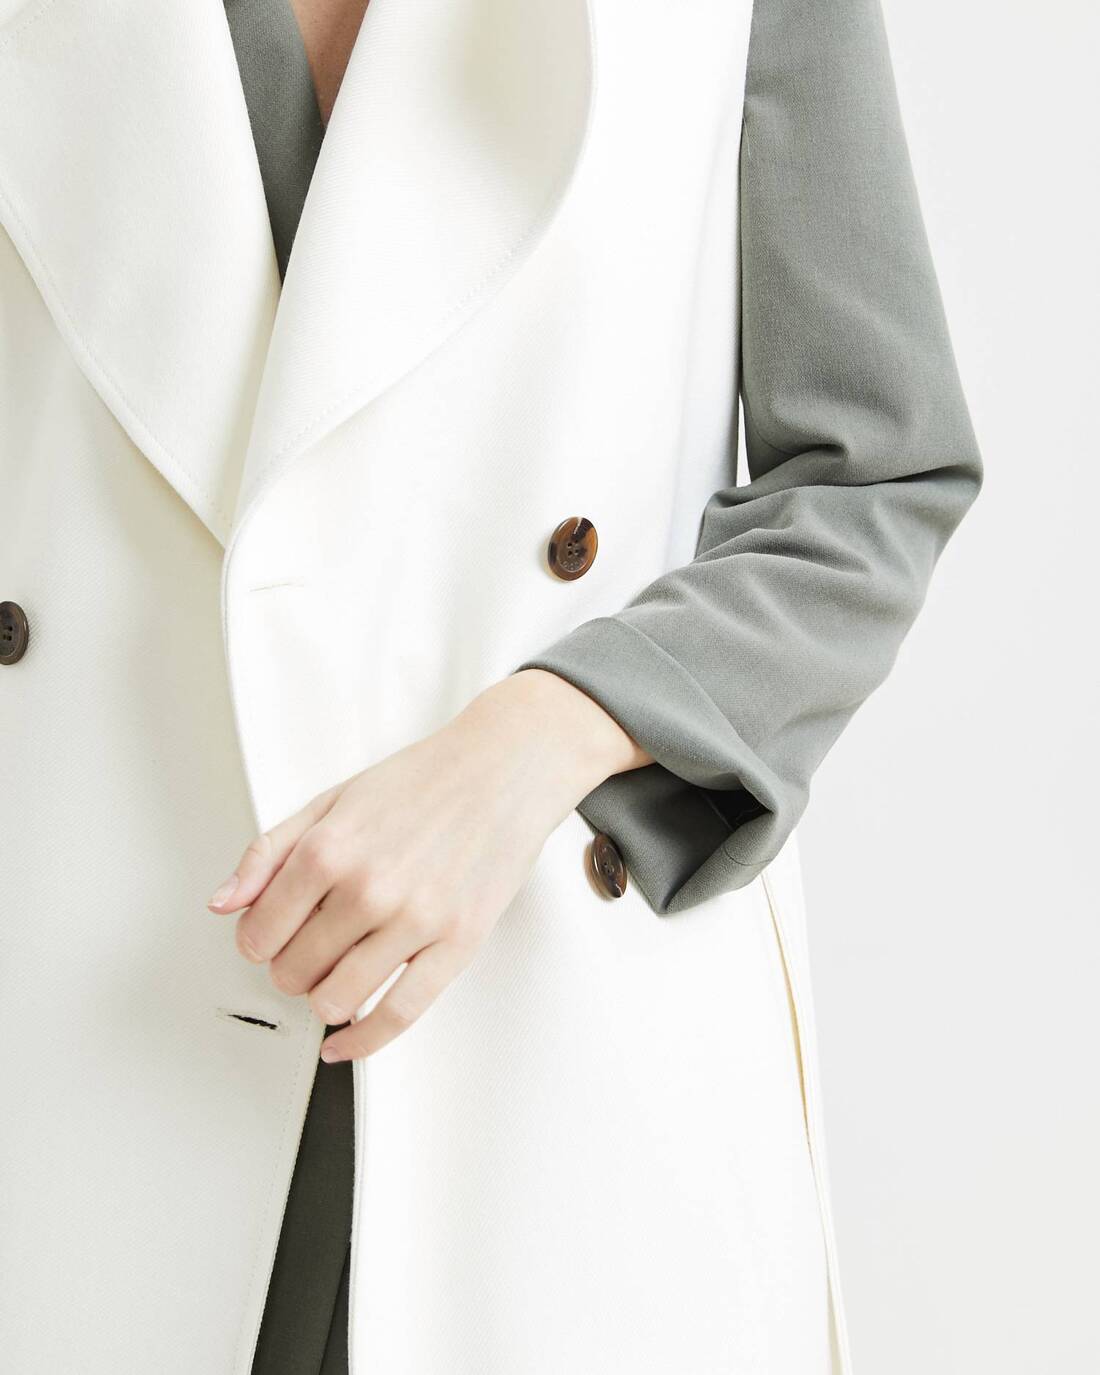 Double-breasted two-piece wool trenchcoat